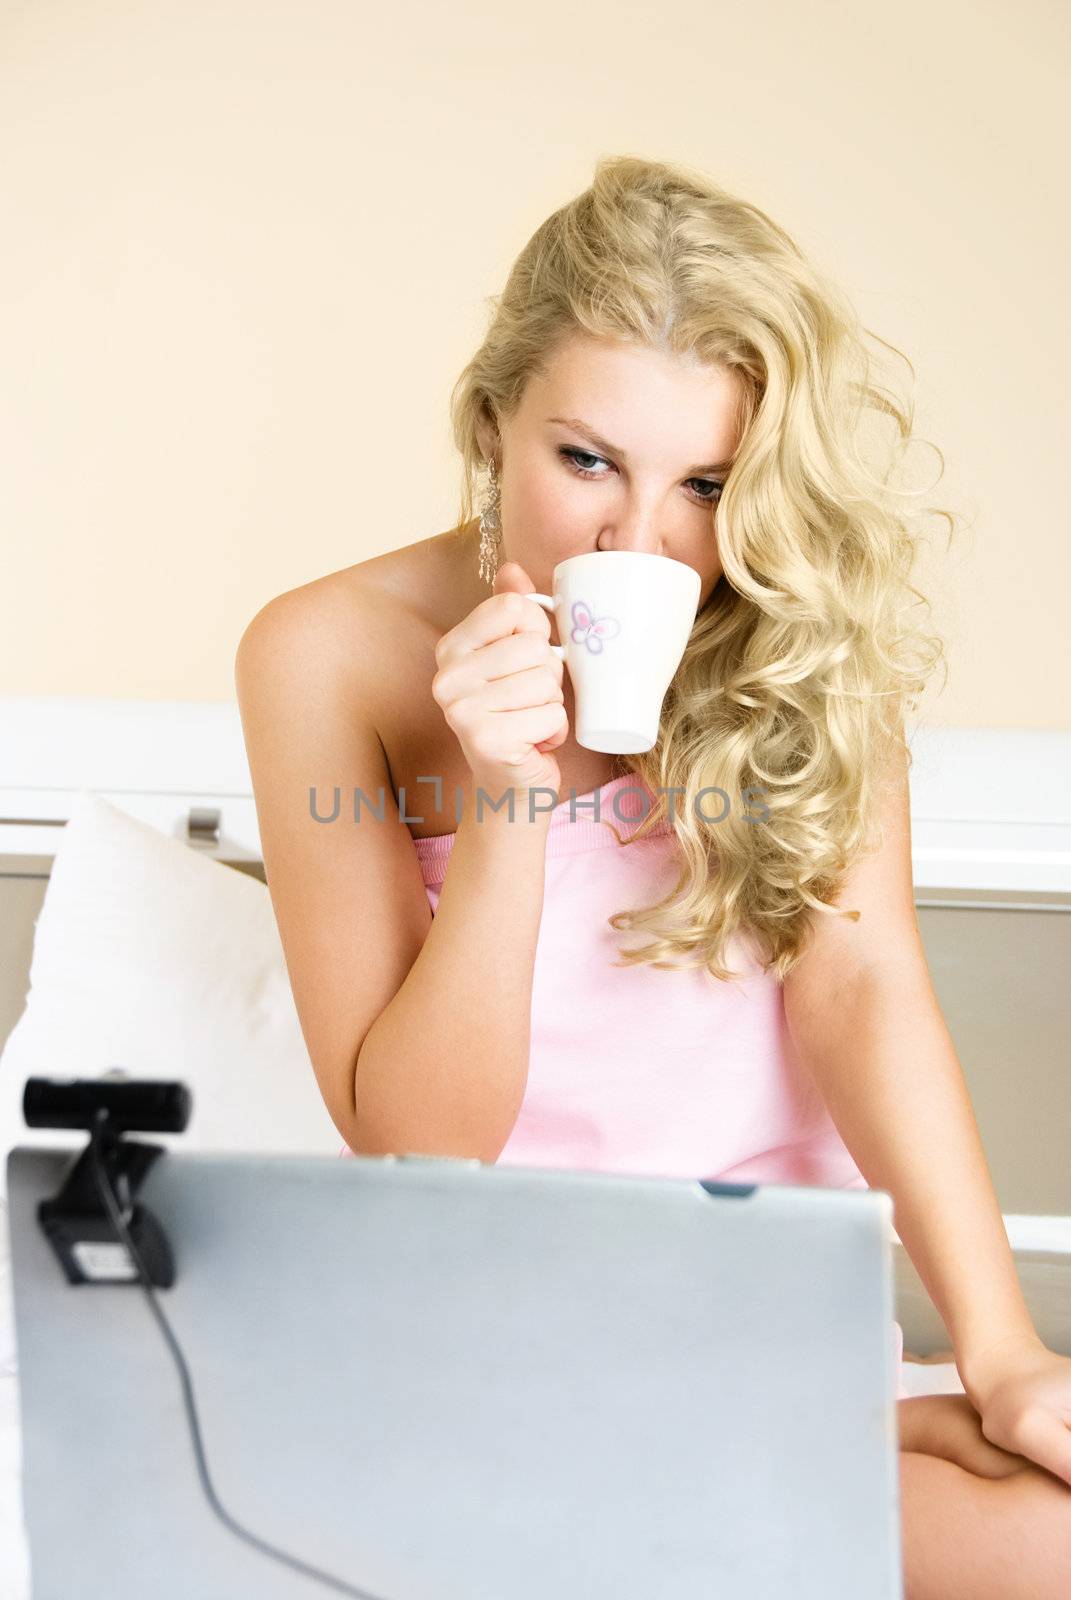 beautiful blond girl at home communicating through the Internet using a web camera and drinking coffee